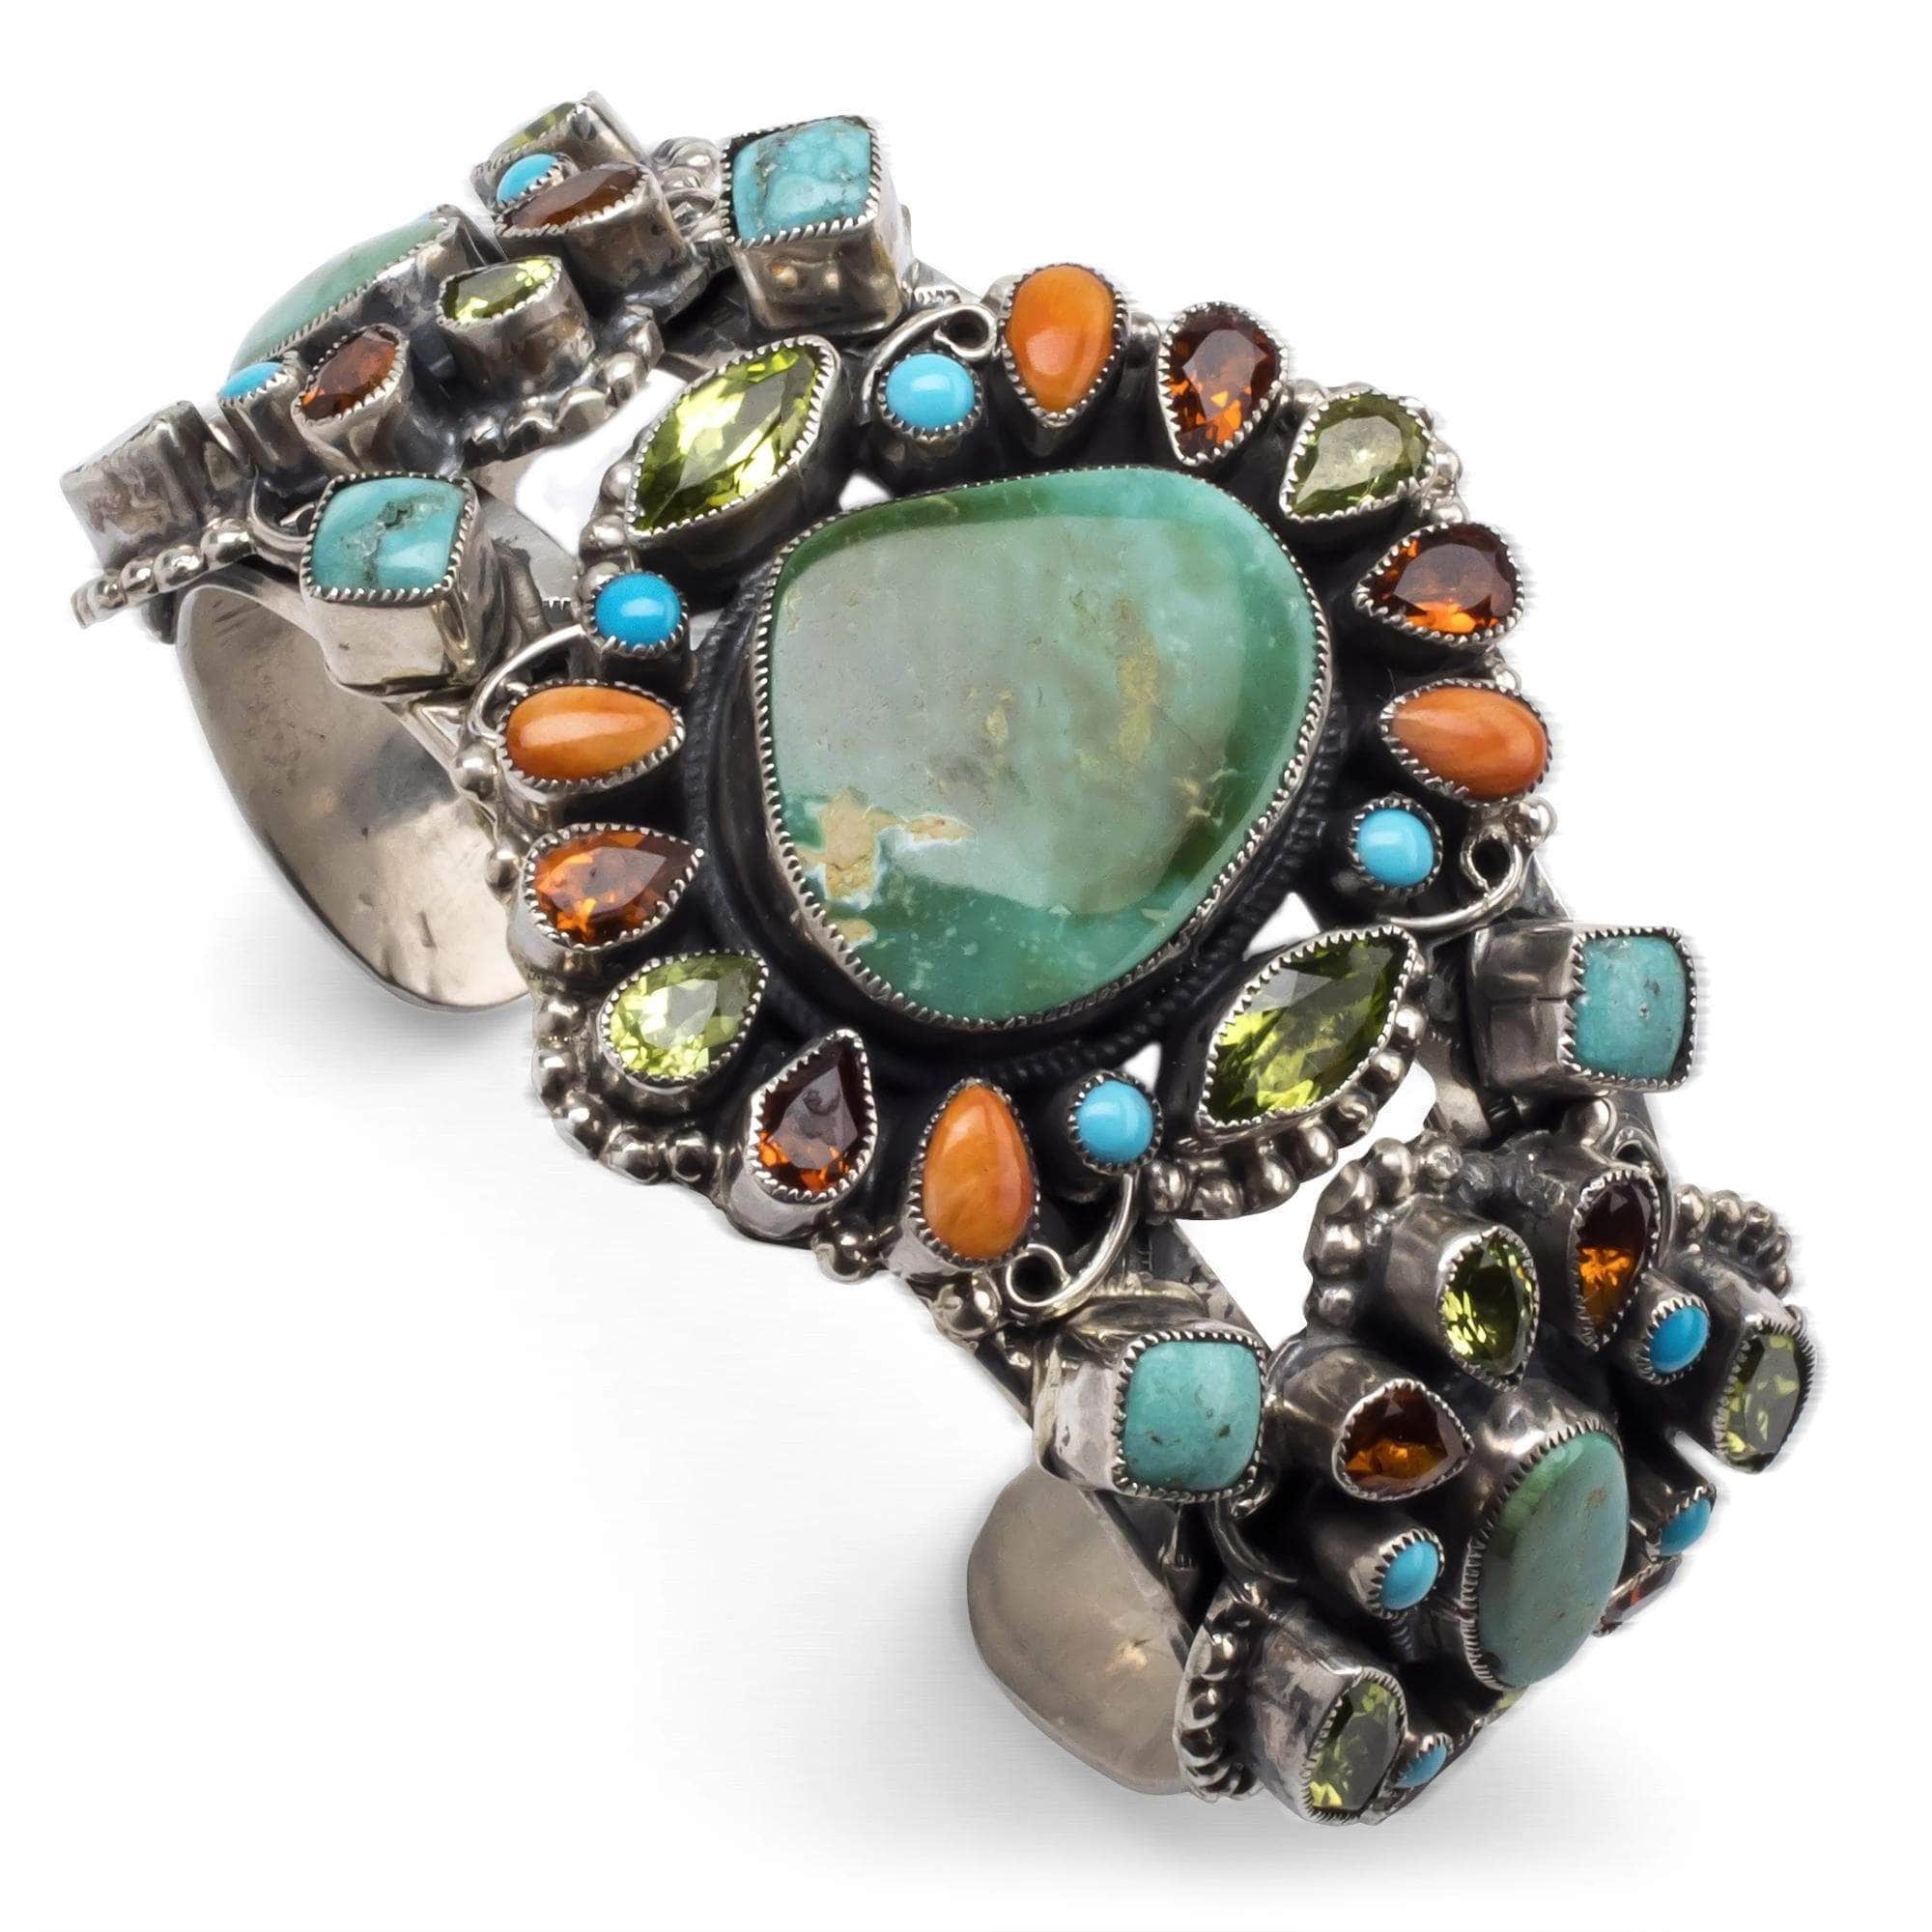 Kalifano Native American Jewelry Leo Feeney Royston & Sleeping Beauty Turquoise, Orange Spiny Oyster Shell, Peridot, and Hessonite USA Native American Made 925 Sterling Silver Cuff NAB4500.002